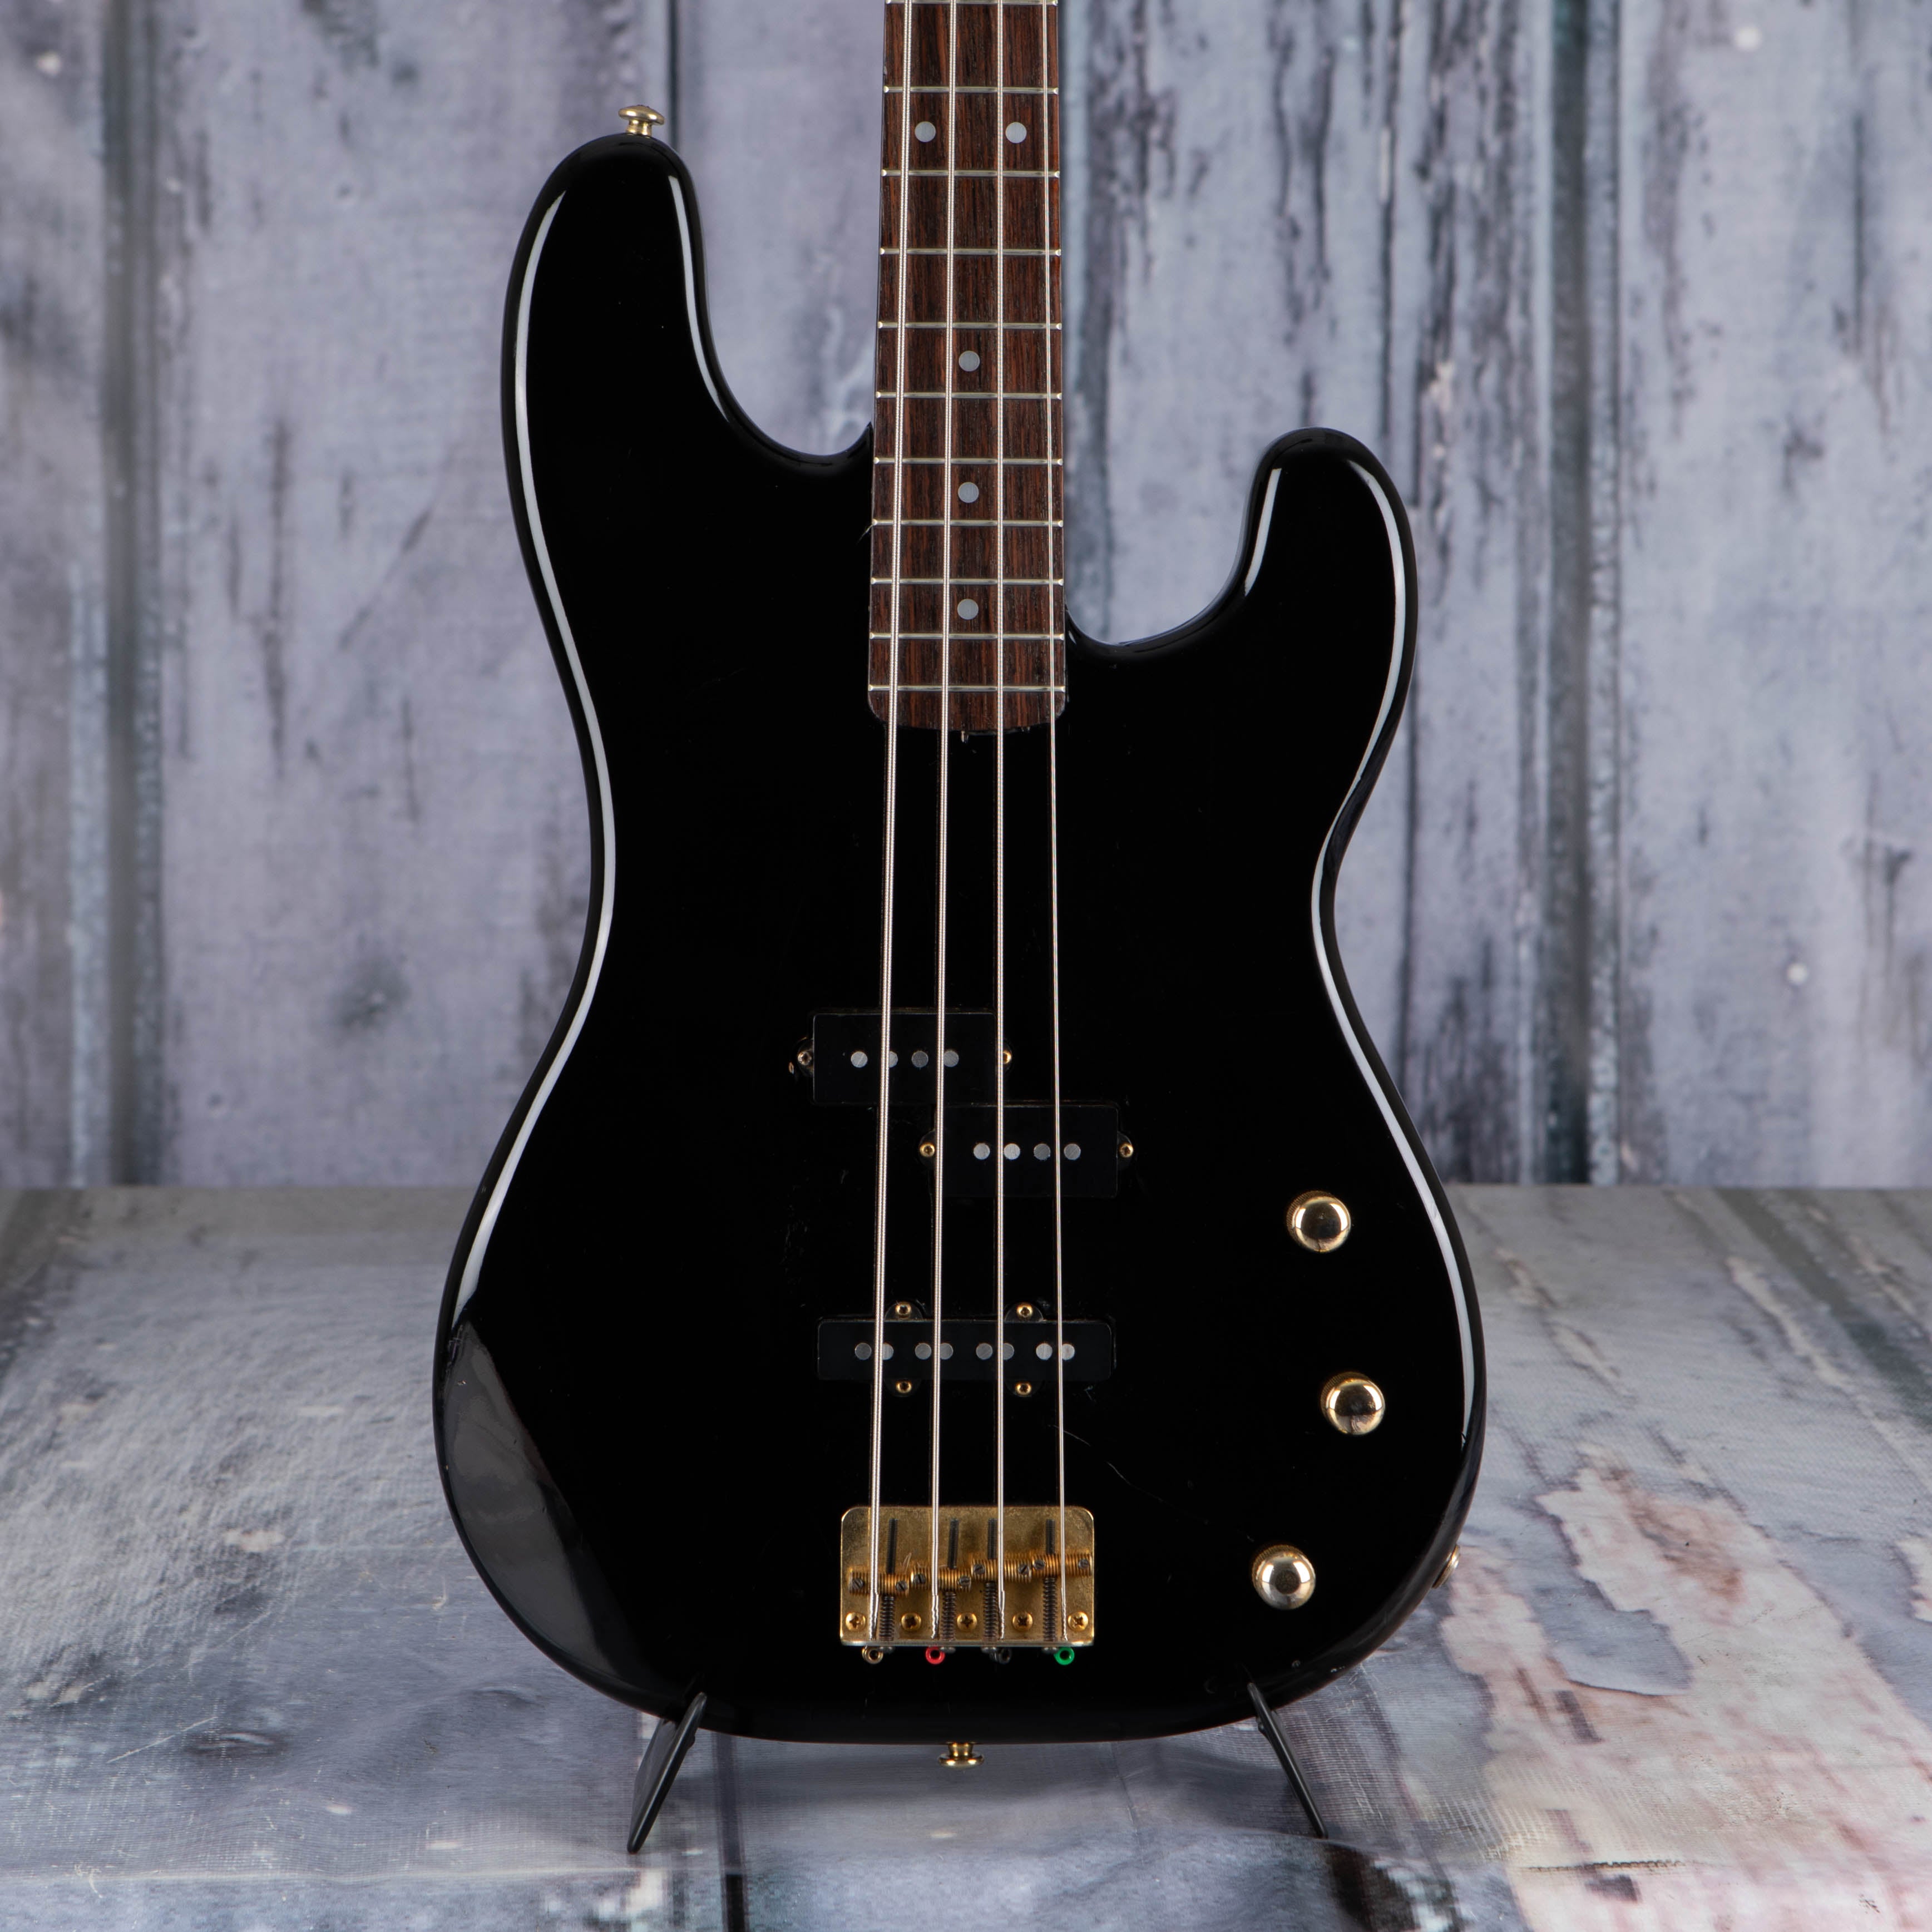 Used 1981 Tokai Hard Puncher Bass, Black | For Sale | Replay 